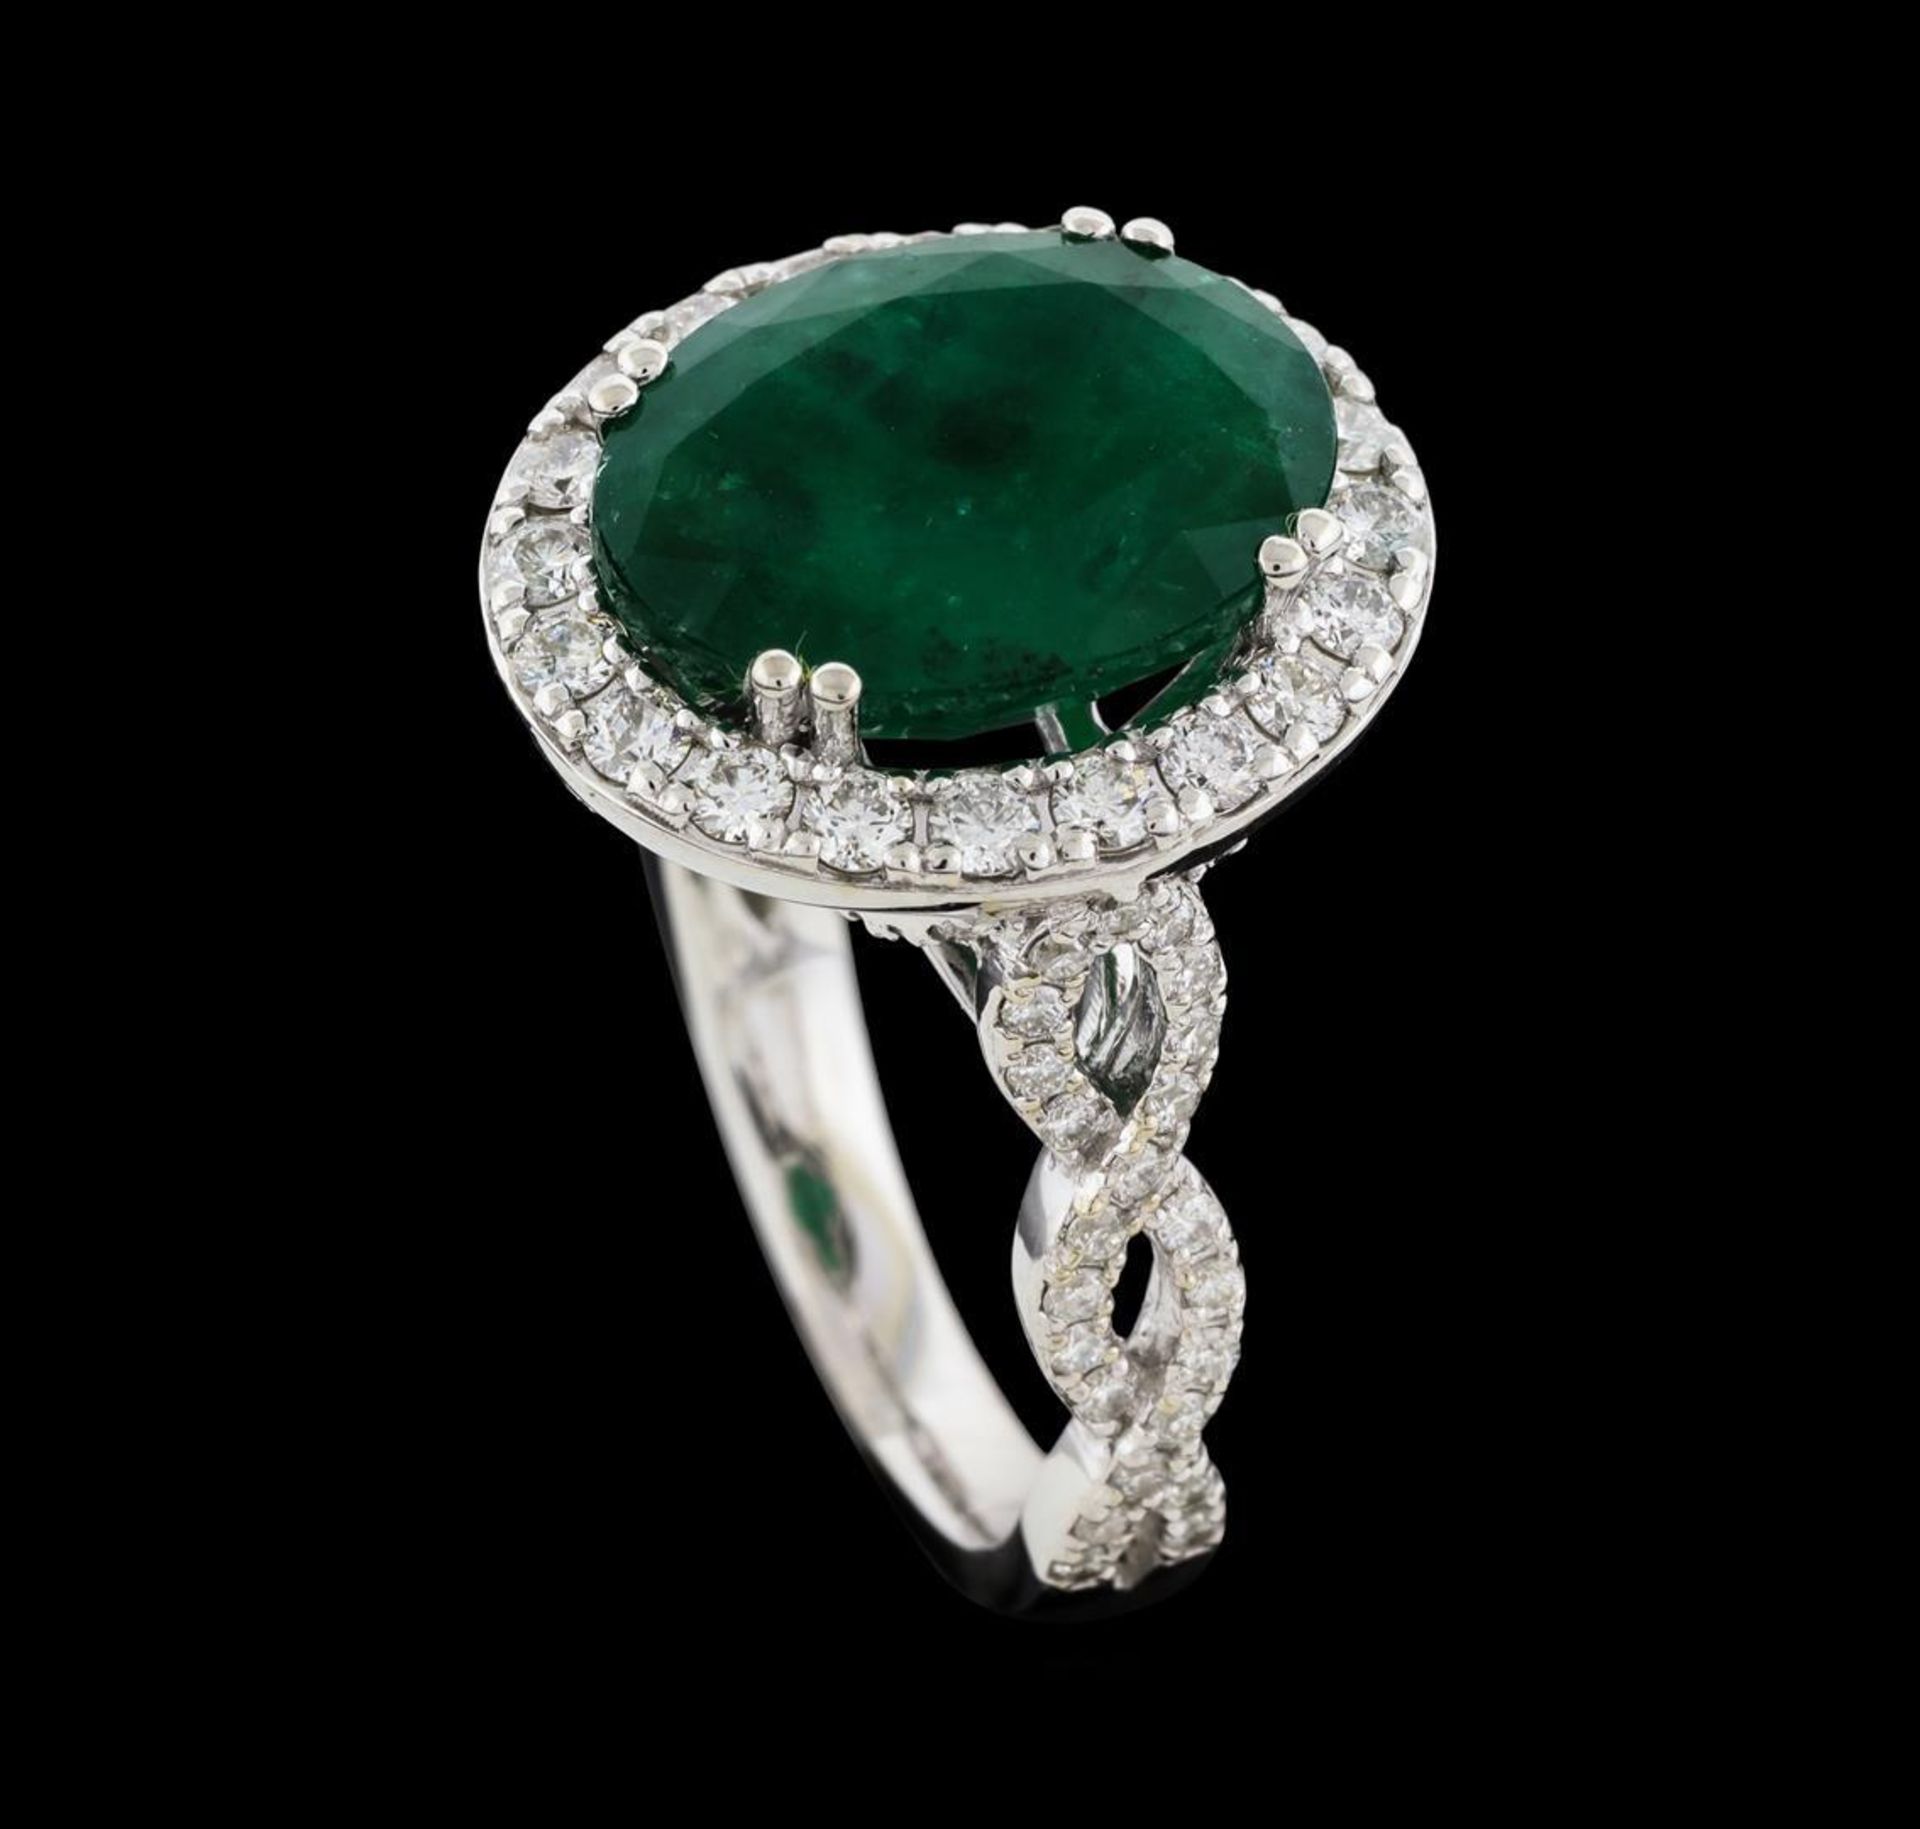 5.68 ctw Emerald and Diamond Ring - 14KT White Gold - Image 4 of 5